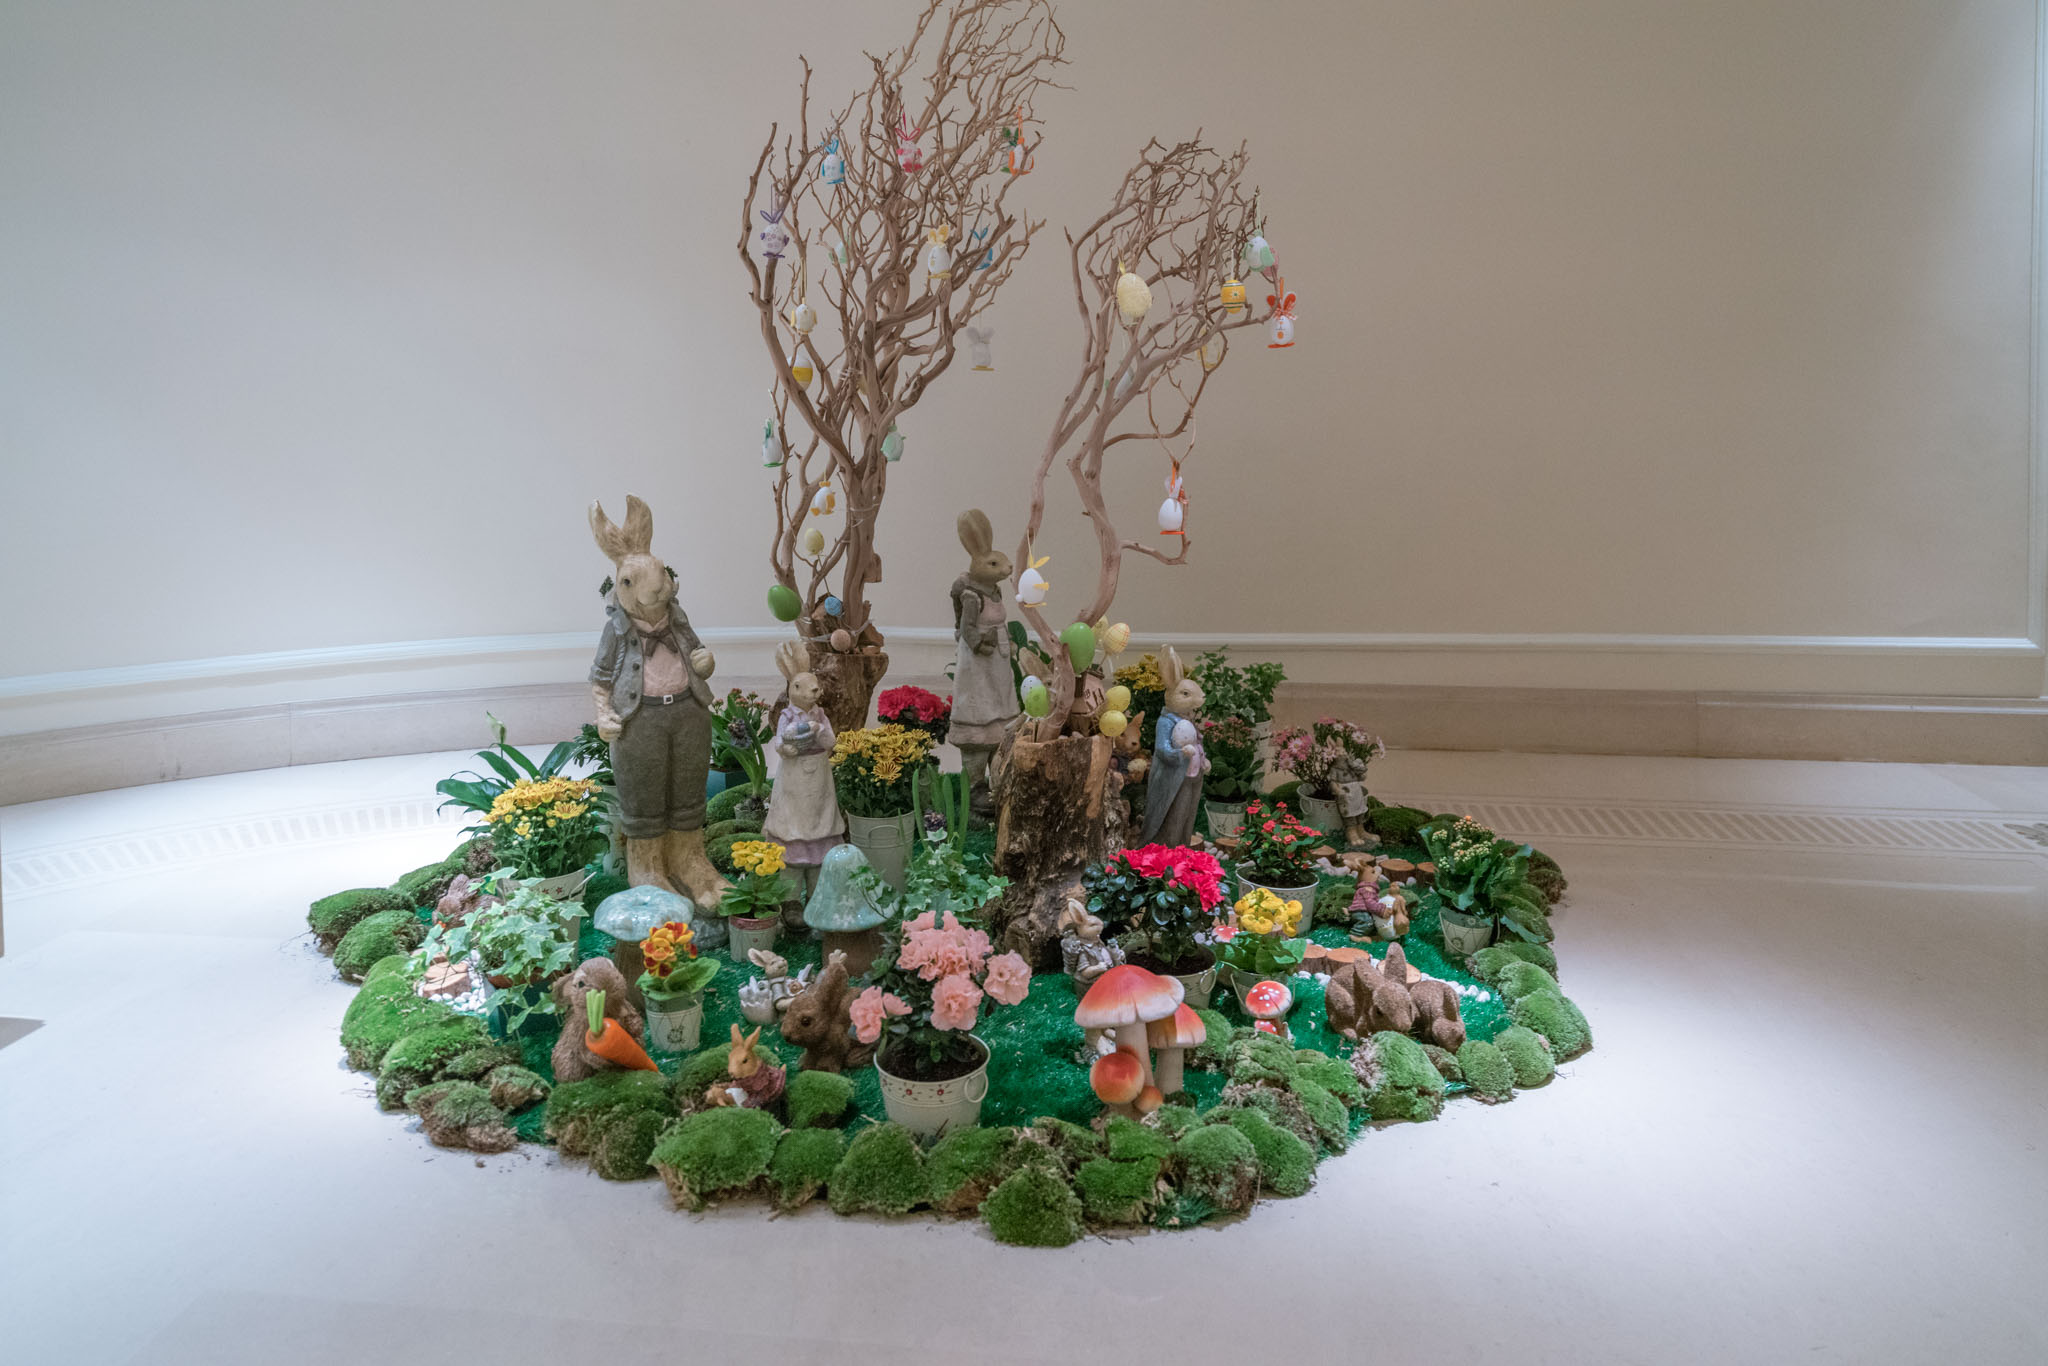 a group of rabbits and trees in a circular arrangement